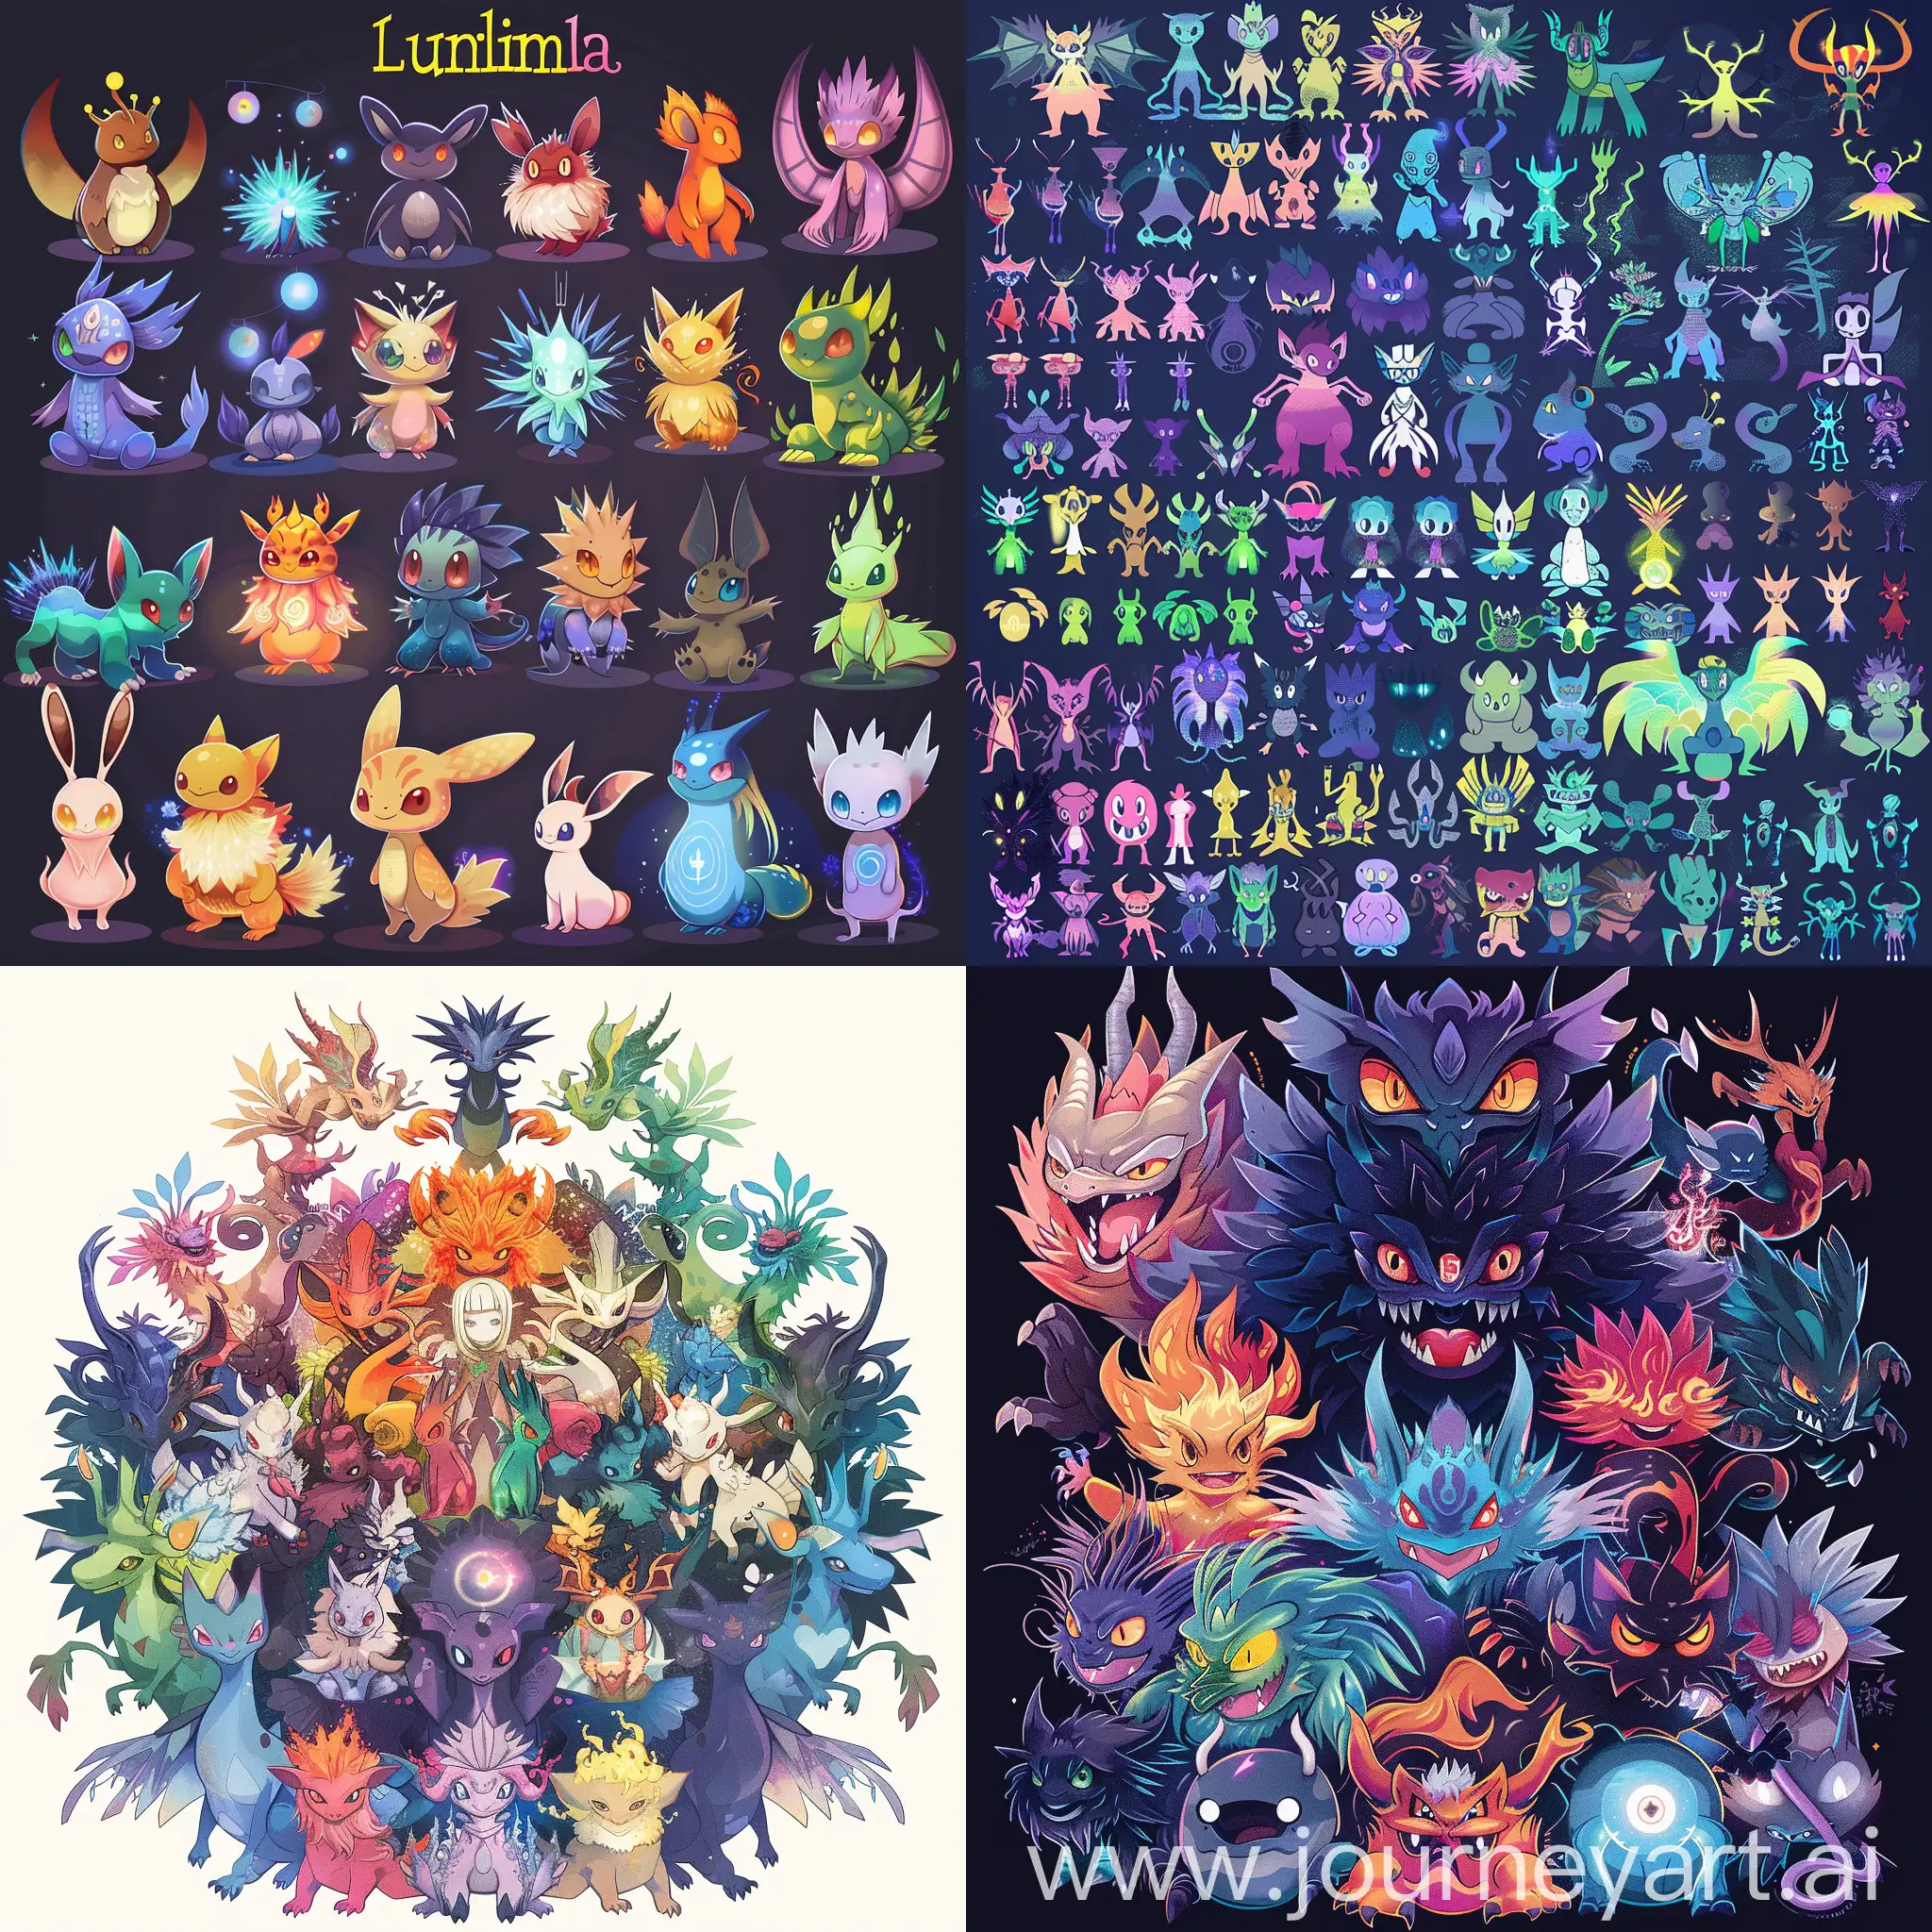 Epic-Anime-Luminimals-A-Hundred-Evolved-Creatures-of-Power-and-Uniqueness